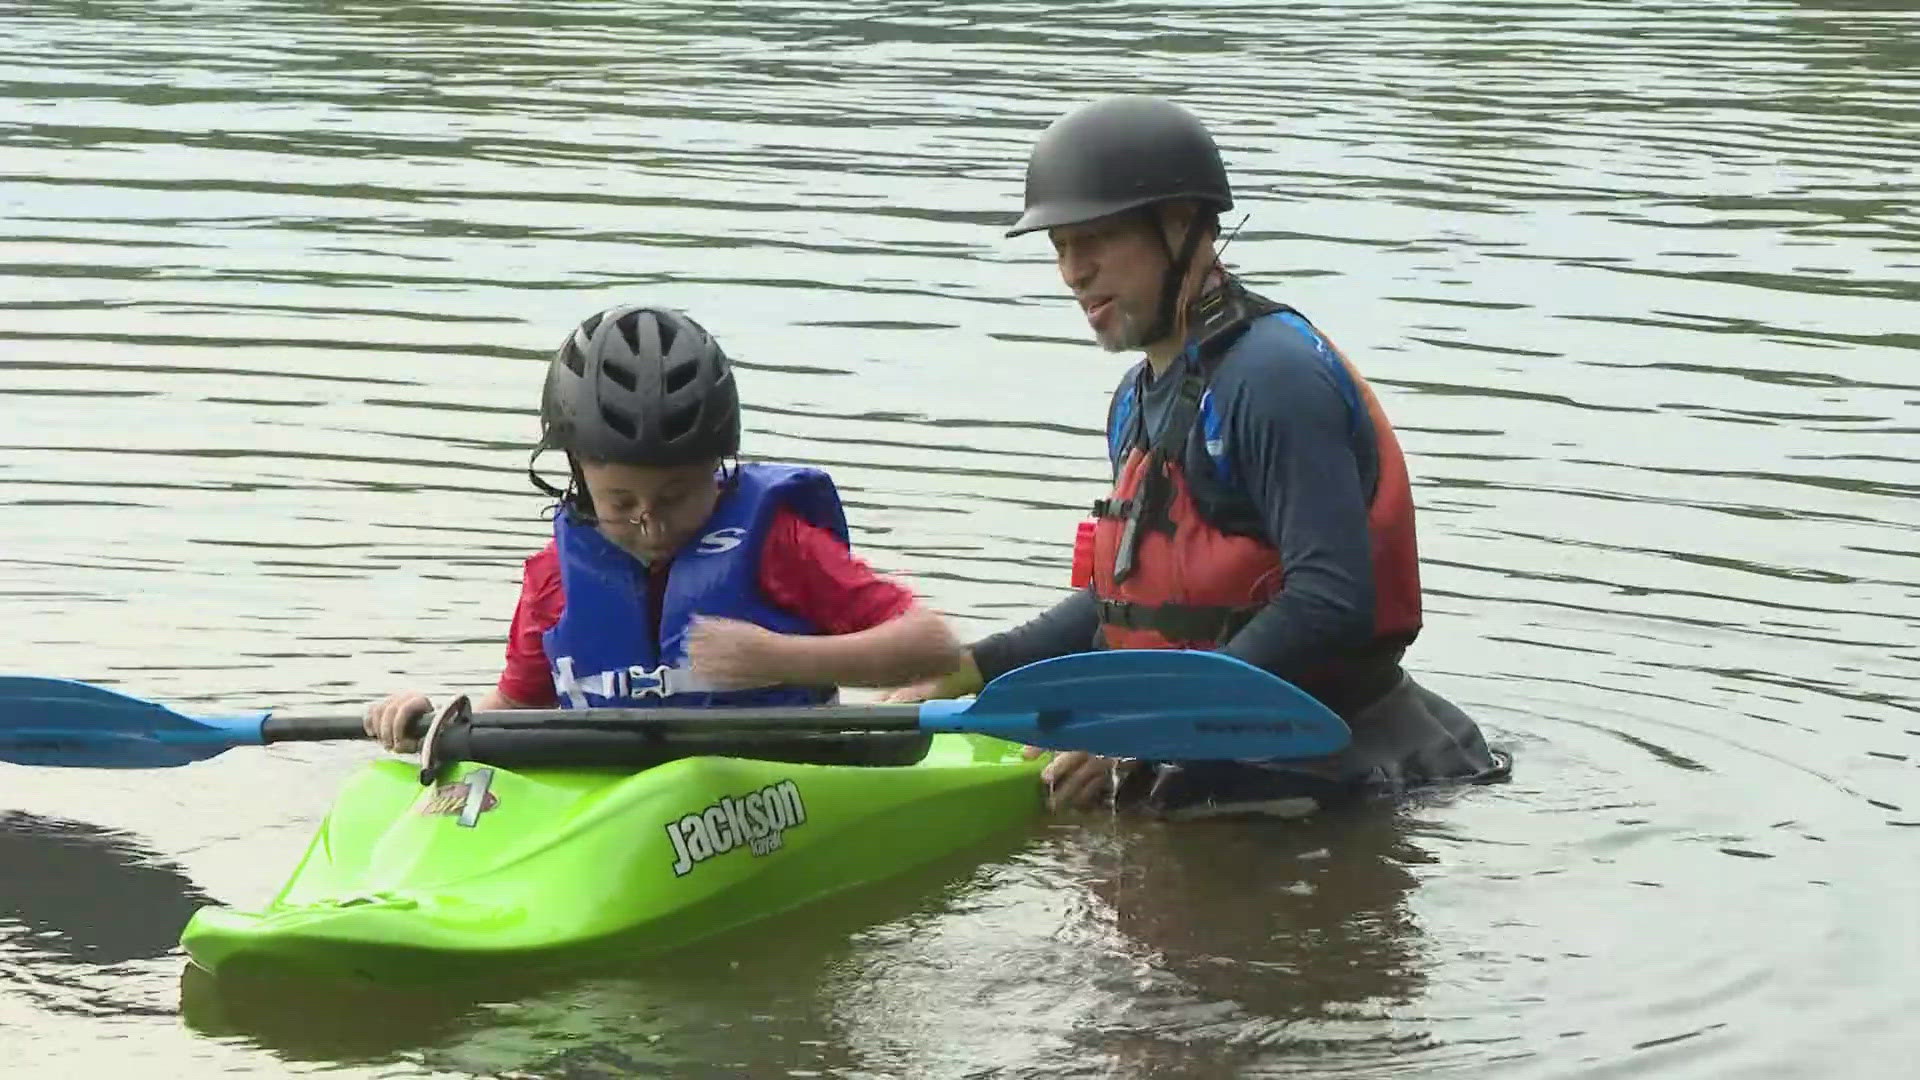 After a man drowned in the river, kids are learning the best water practices.